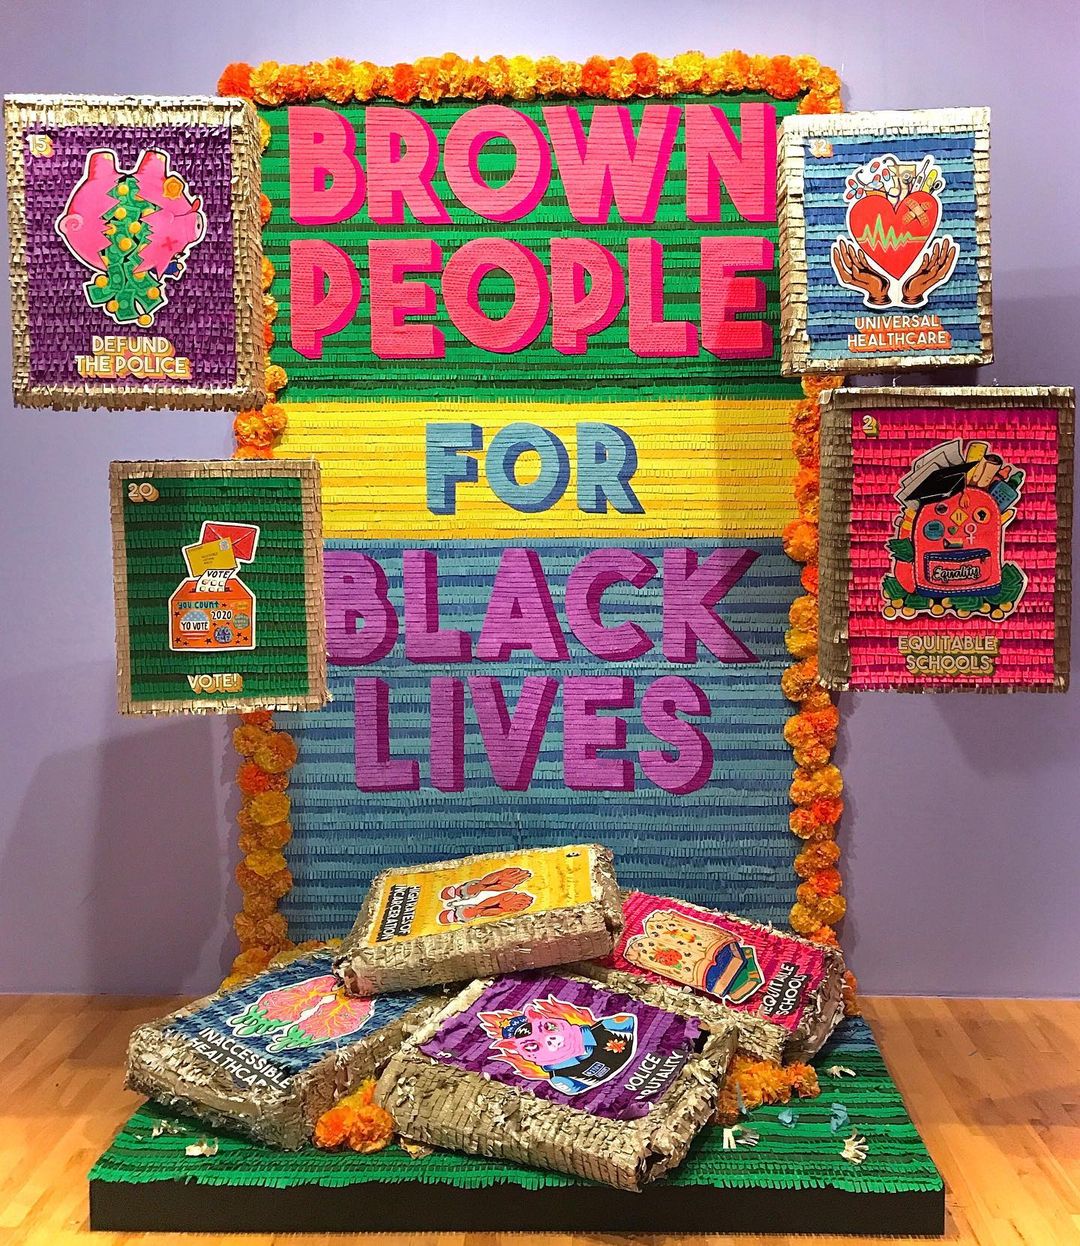 Yollocalli’s piece in the Day of the Dead Exhibition, titled “Brown People for Black Lives”